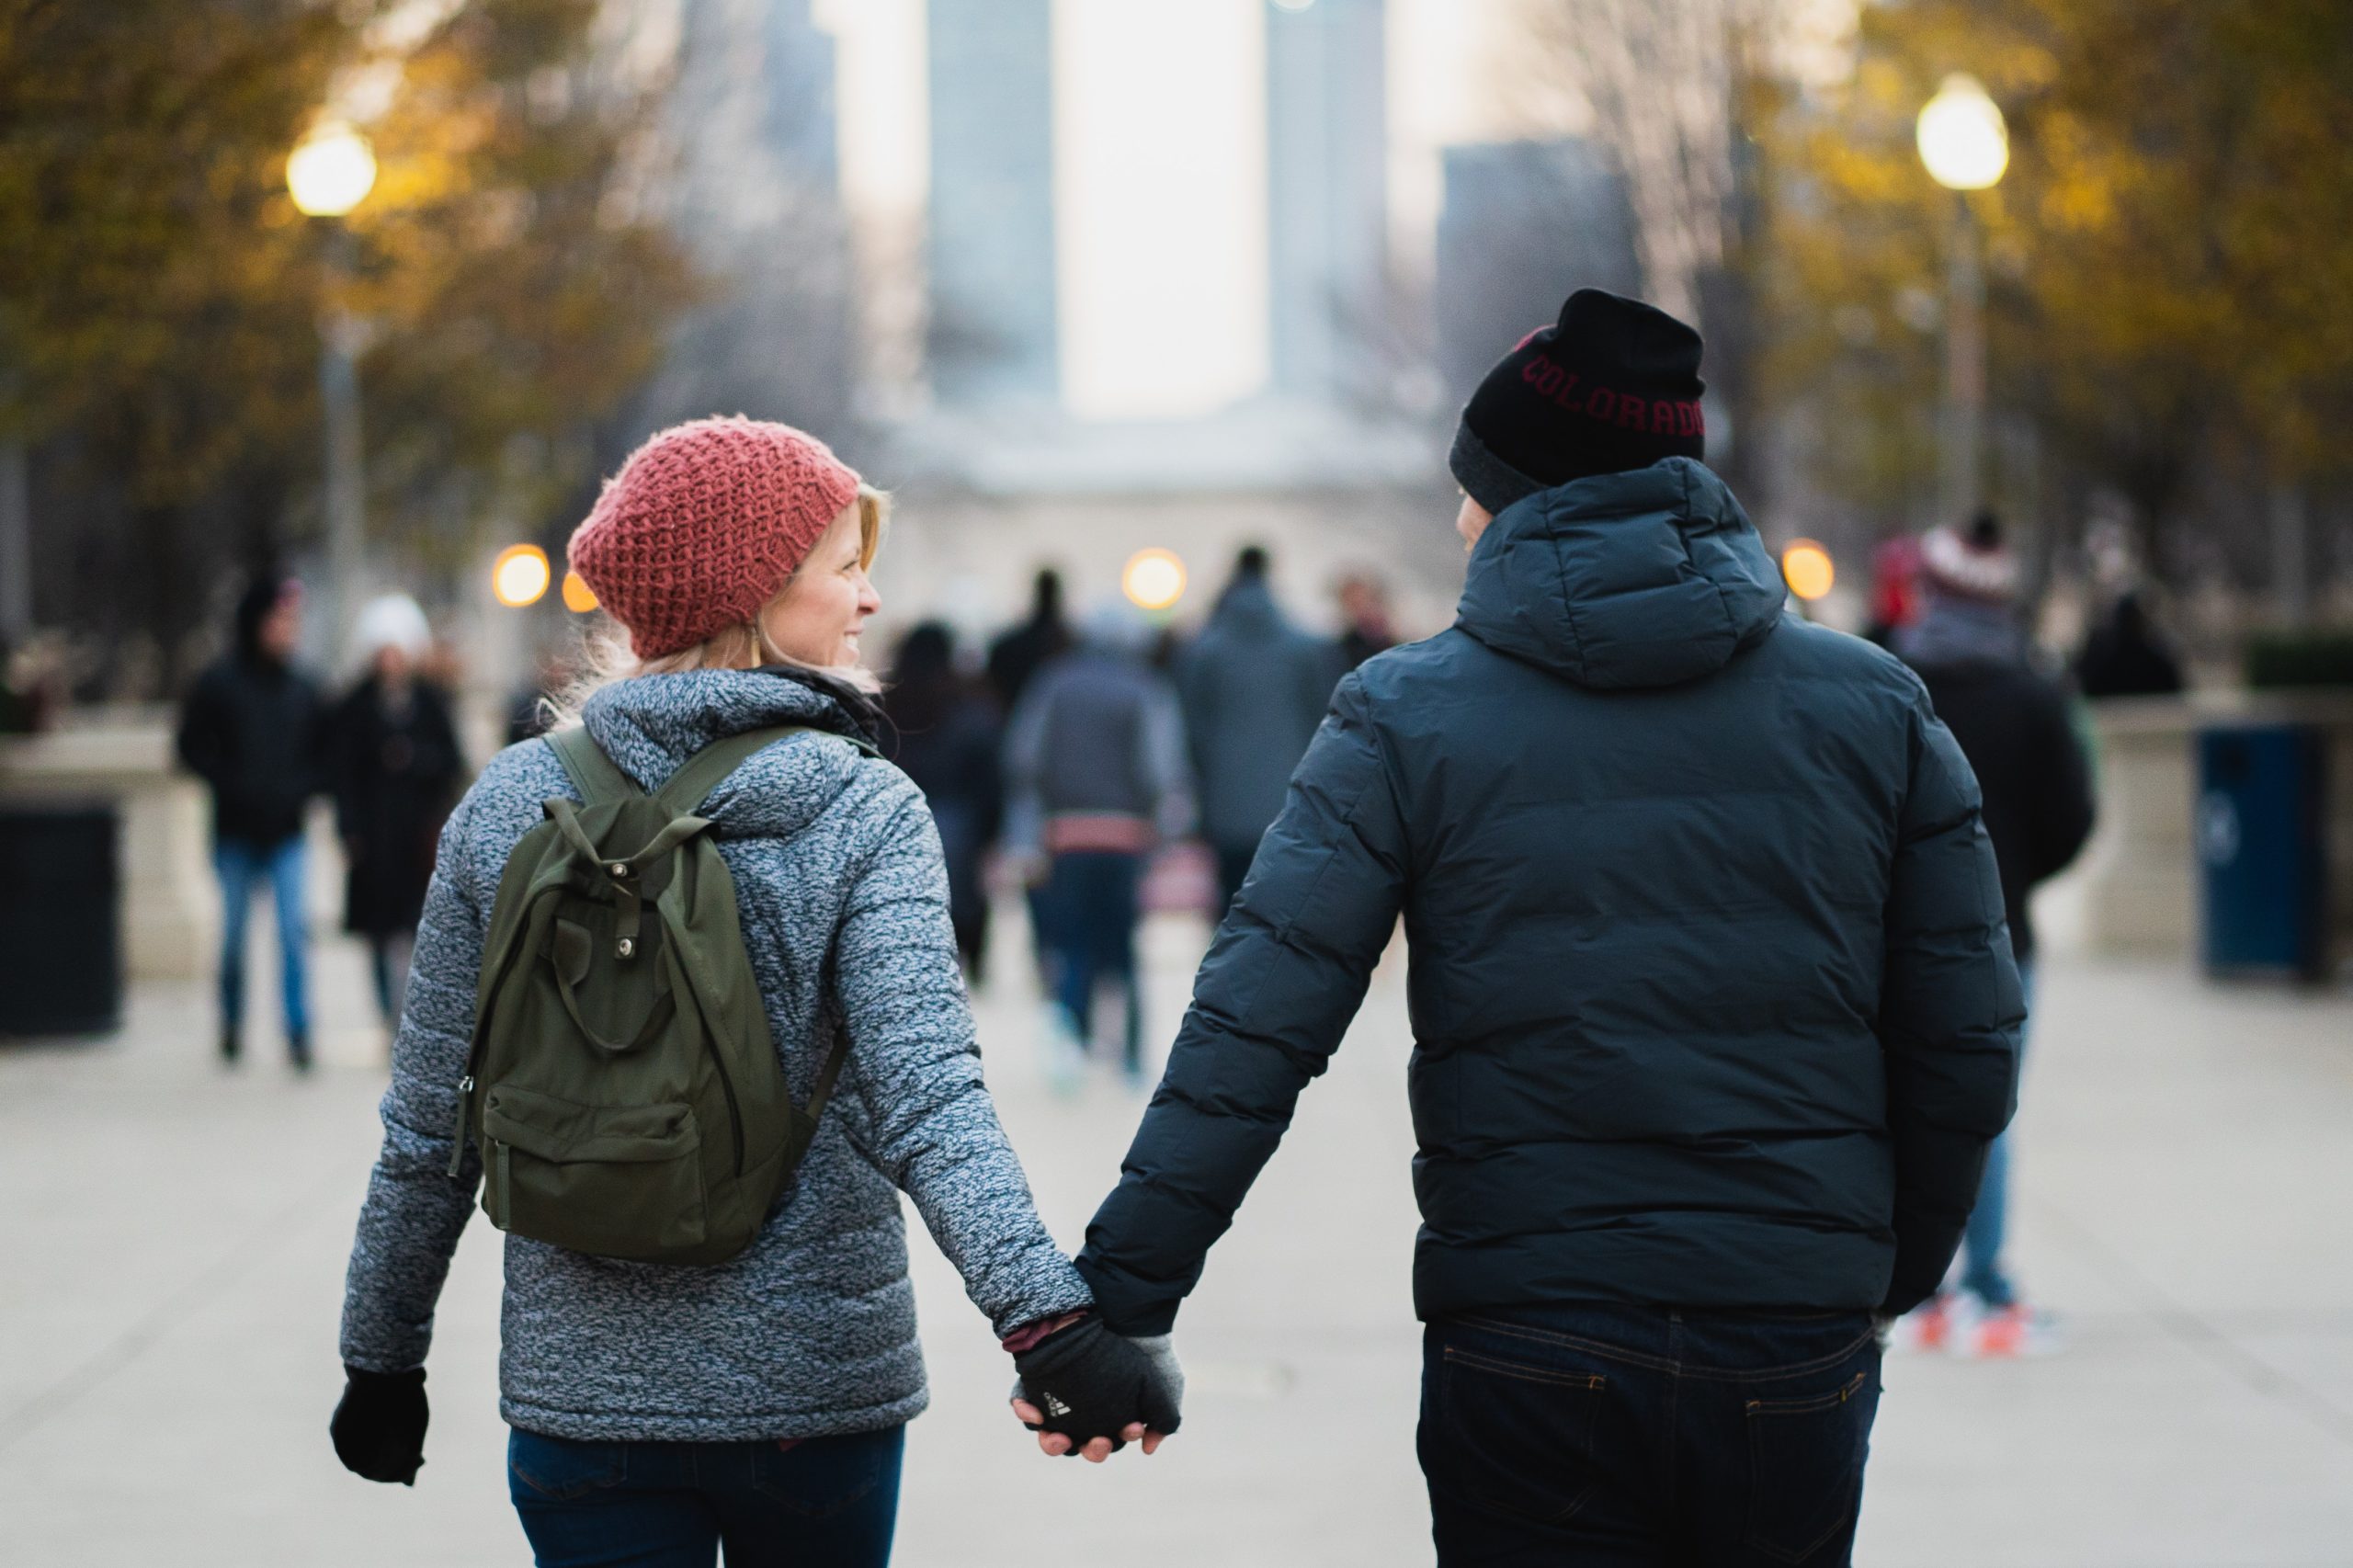 A couple in the cold, holding hands as they walk along the street.